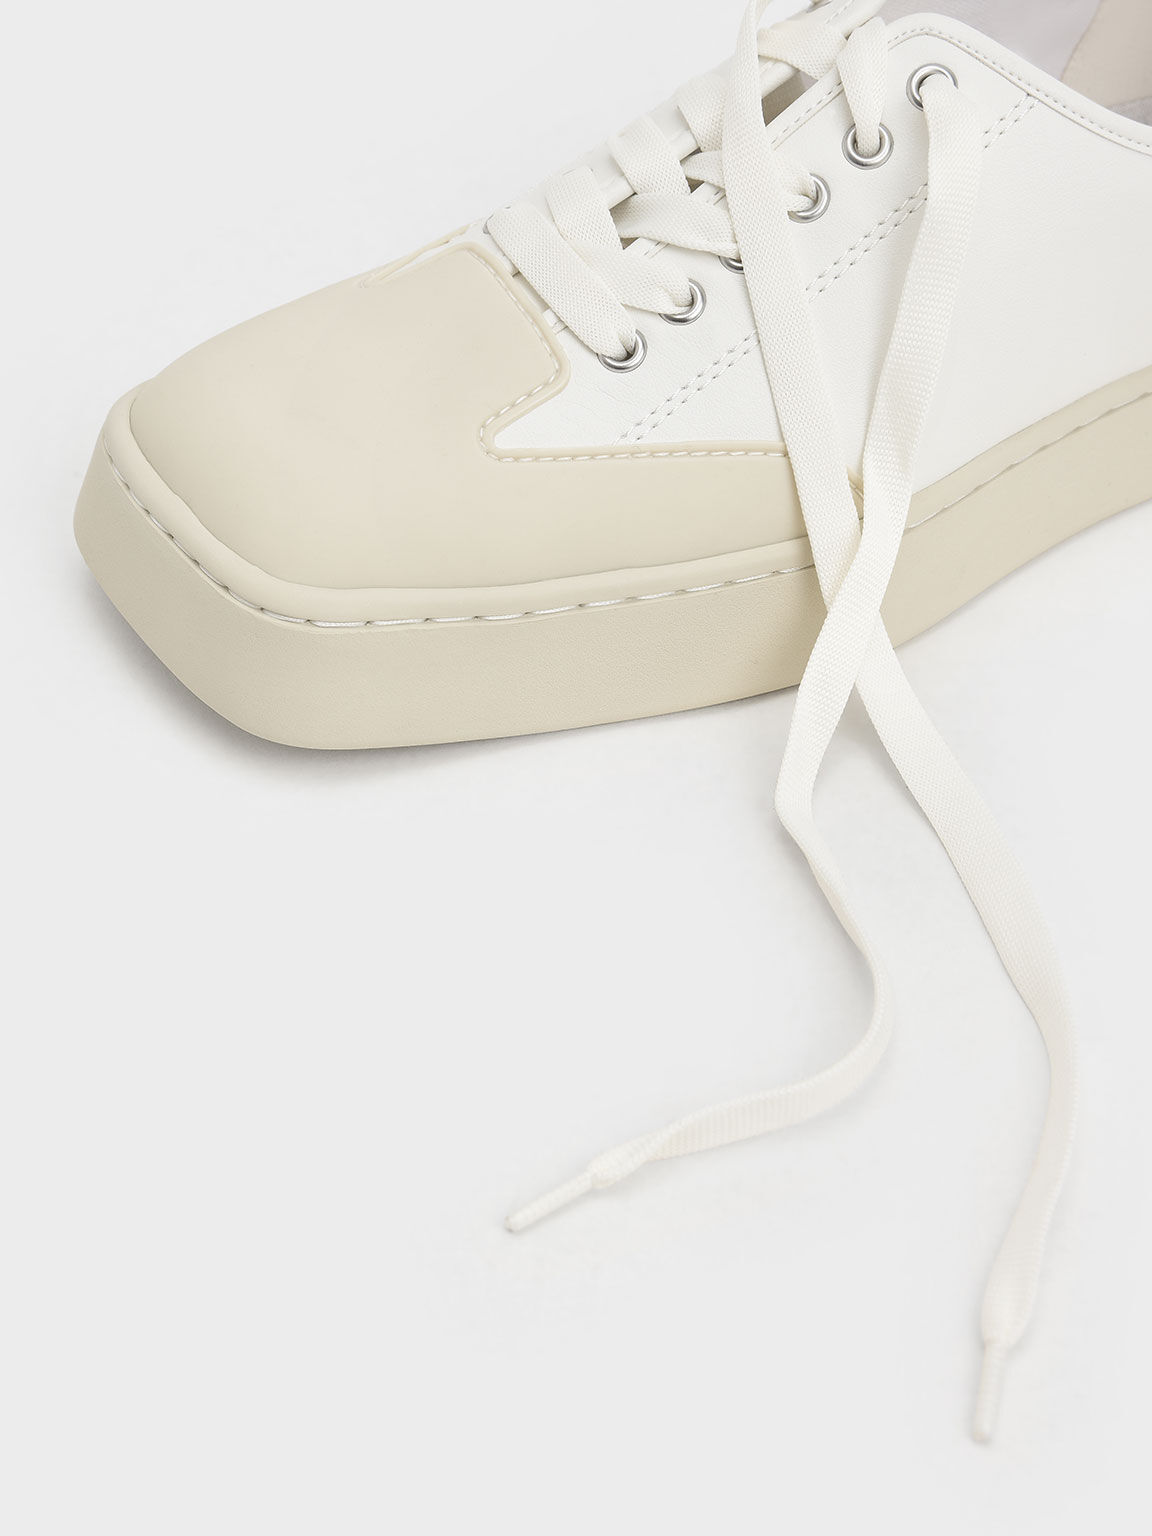 Two-Tone Low-Top Sneakers, White, hi-res